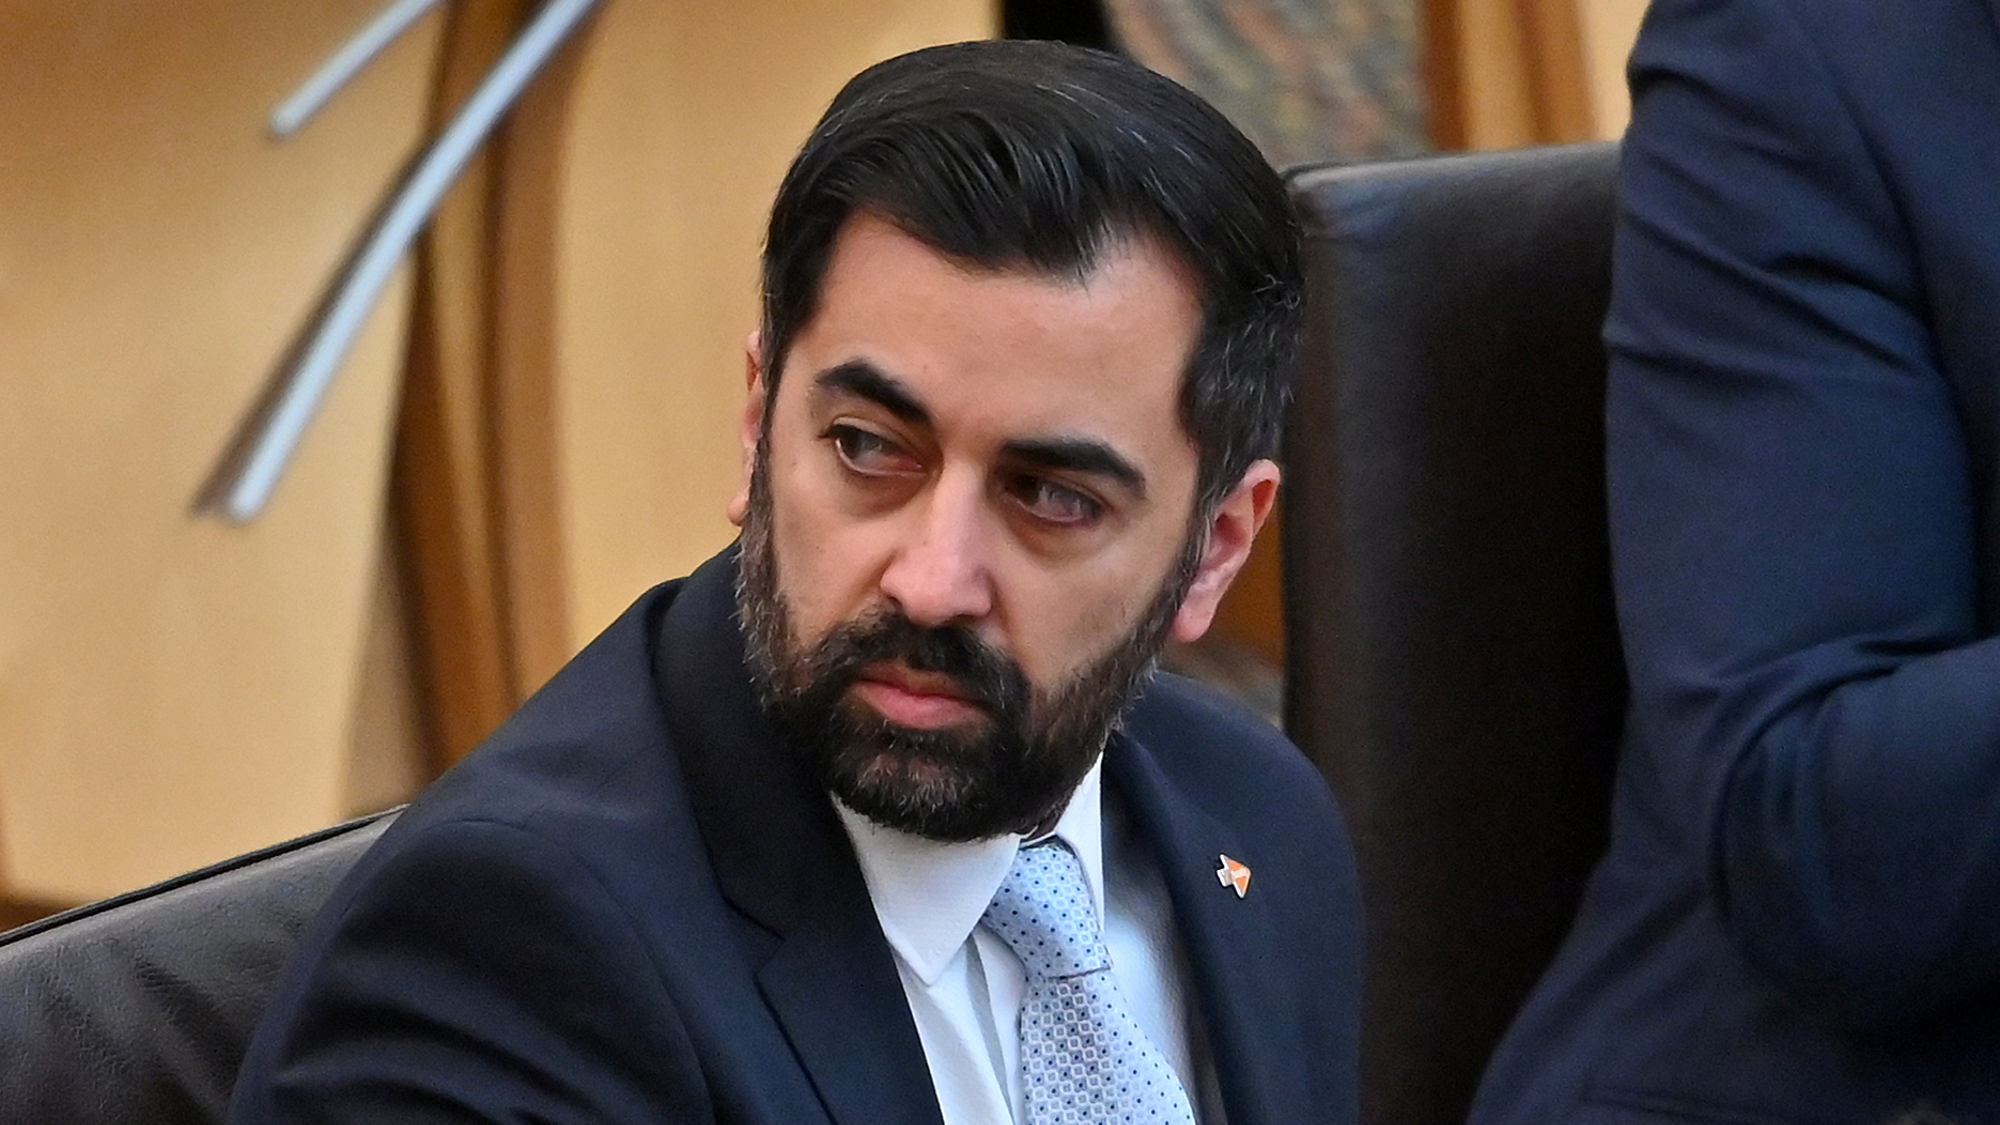  Humza Yousaf clears the decks to battle no-confidence vote 